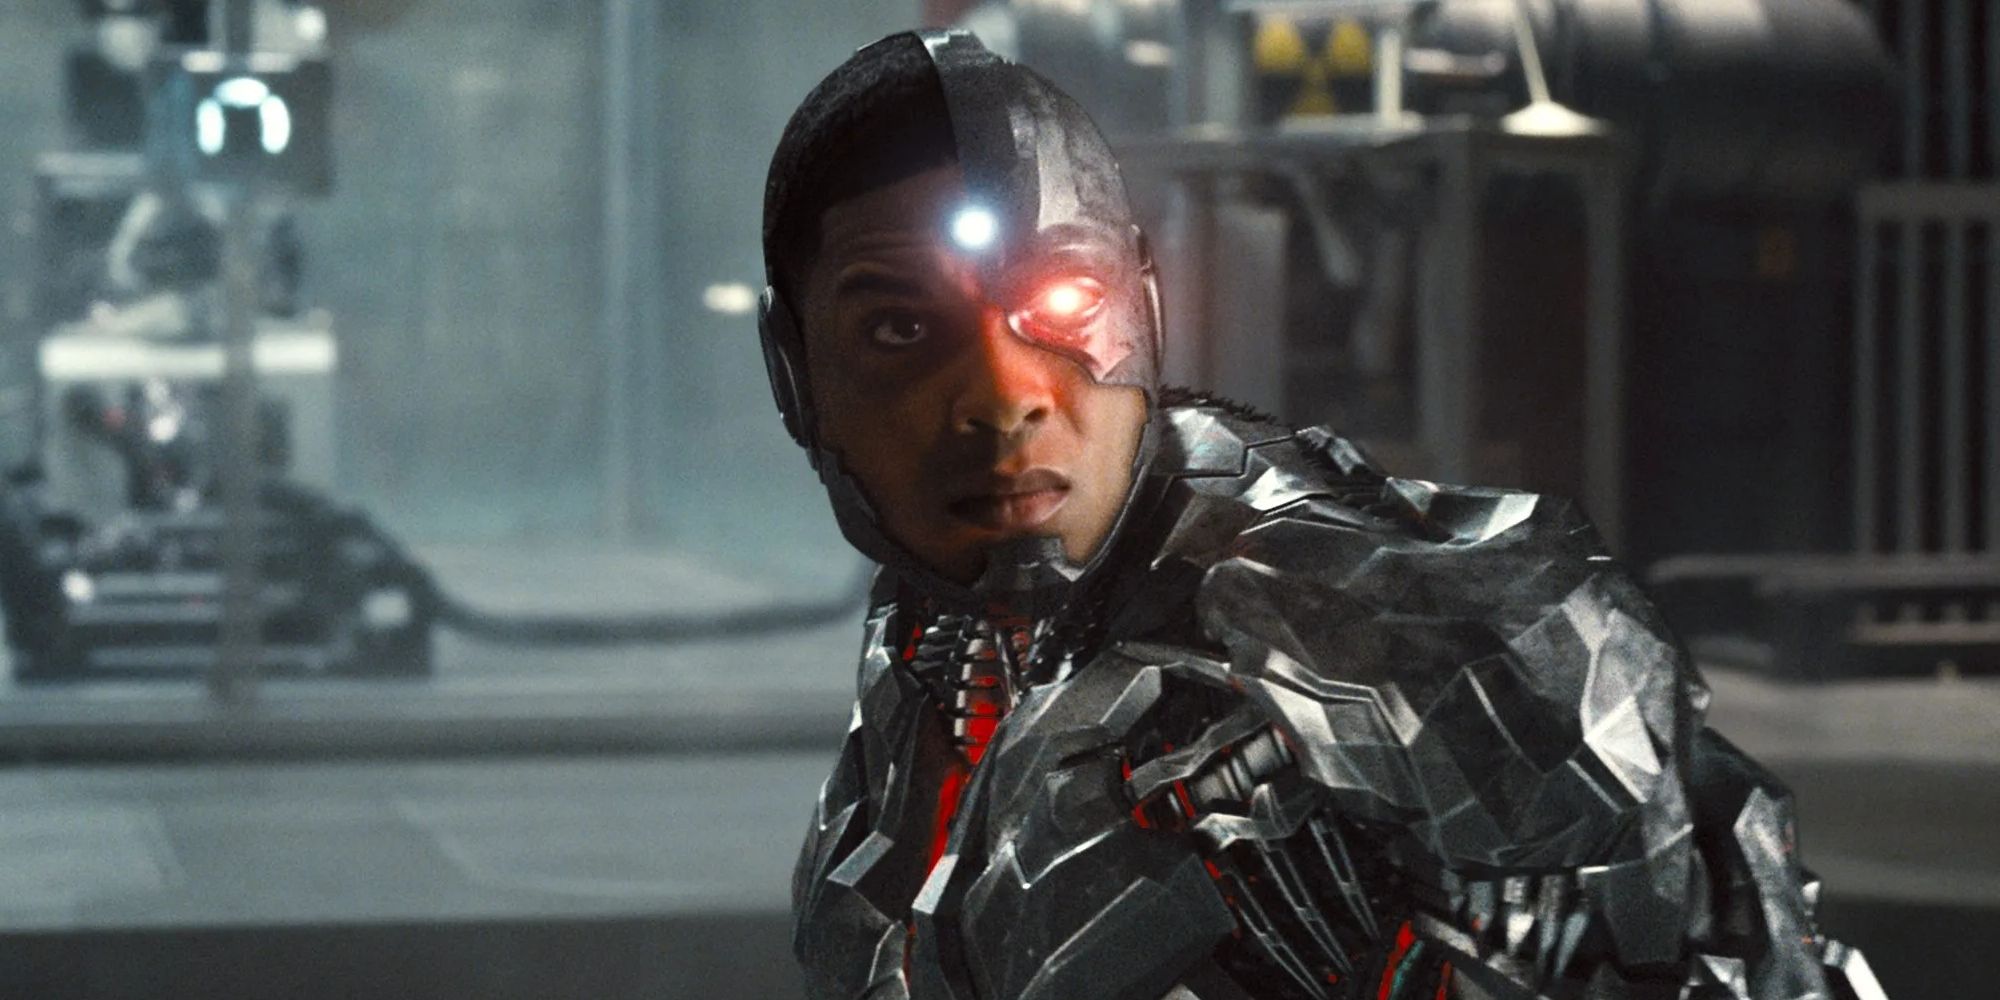 Ray Fisher as Cyborg in Zack Snyder's DCEU Justice League film